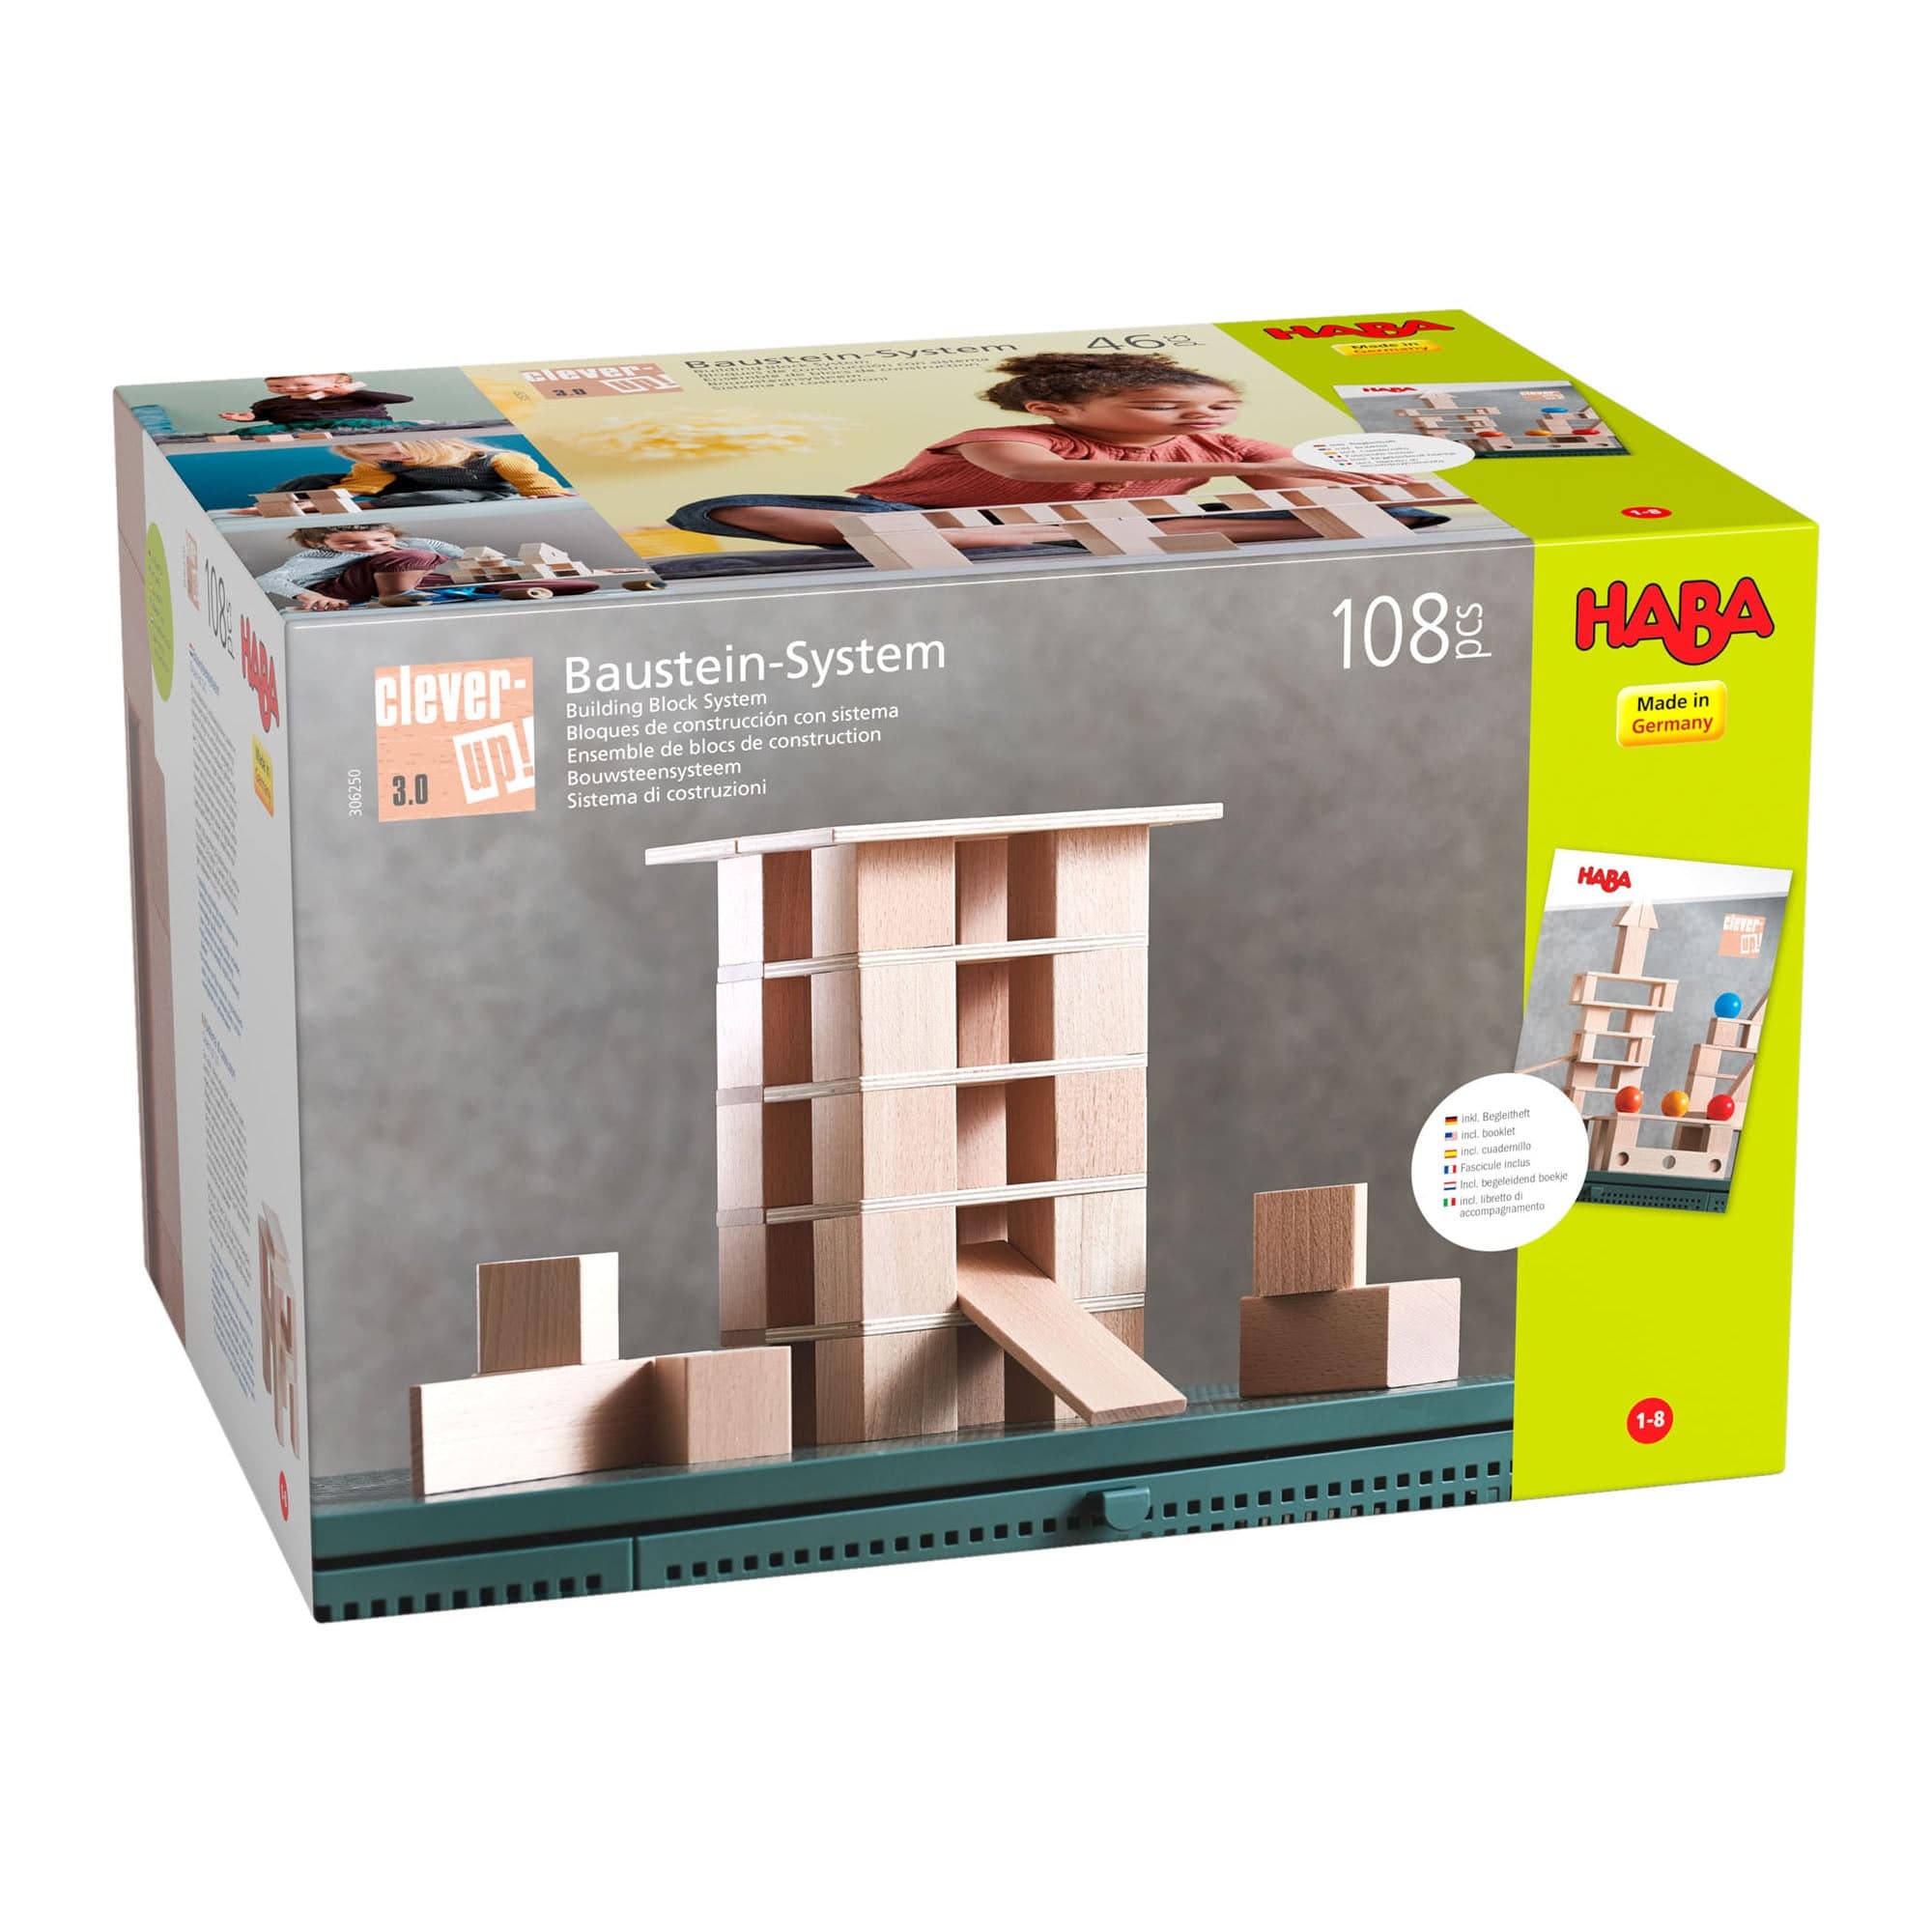 HABA USA Clever Up! Building Block System Box